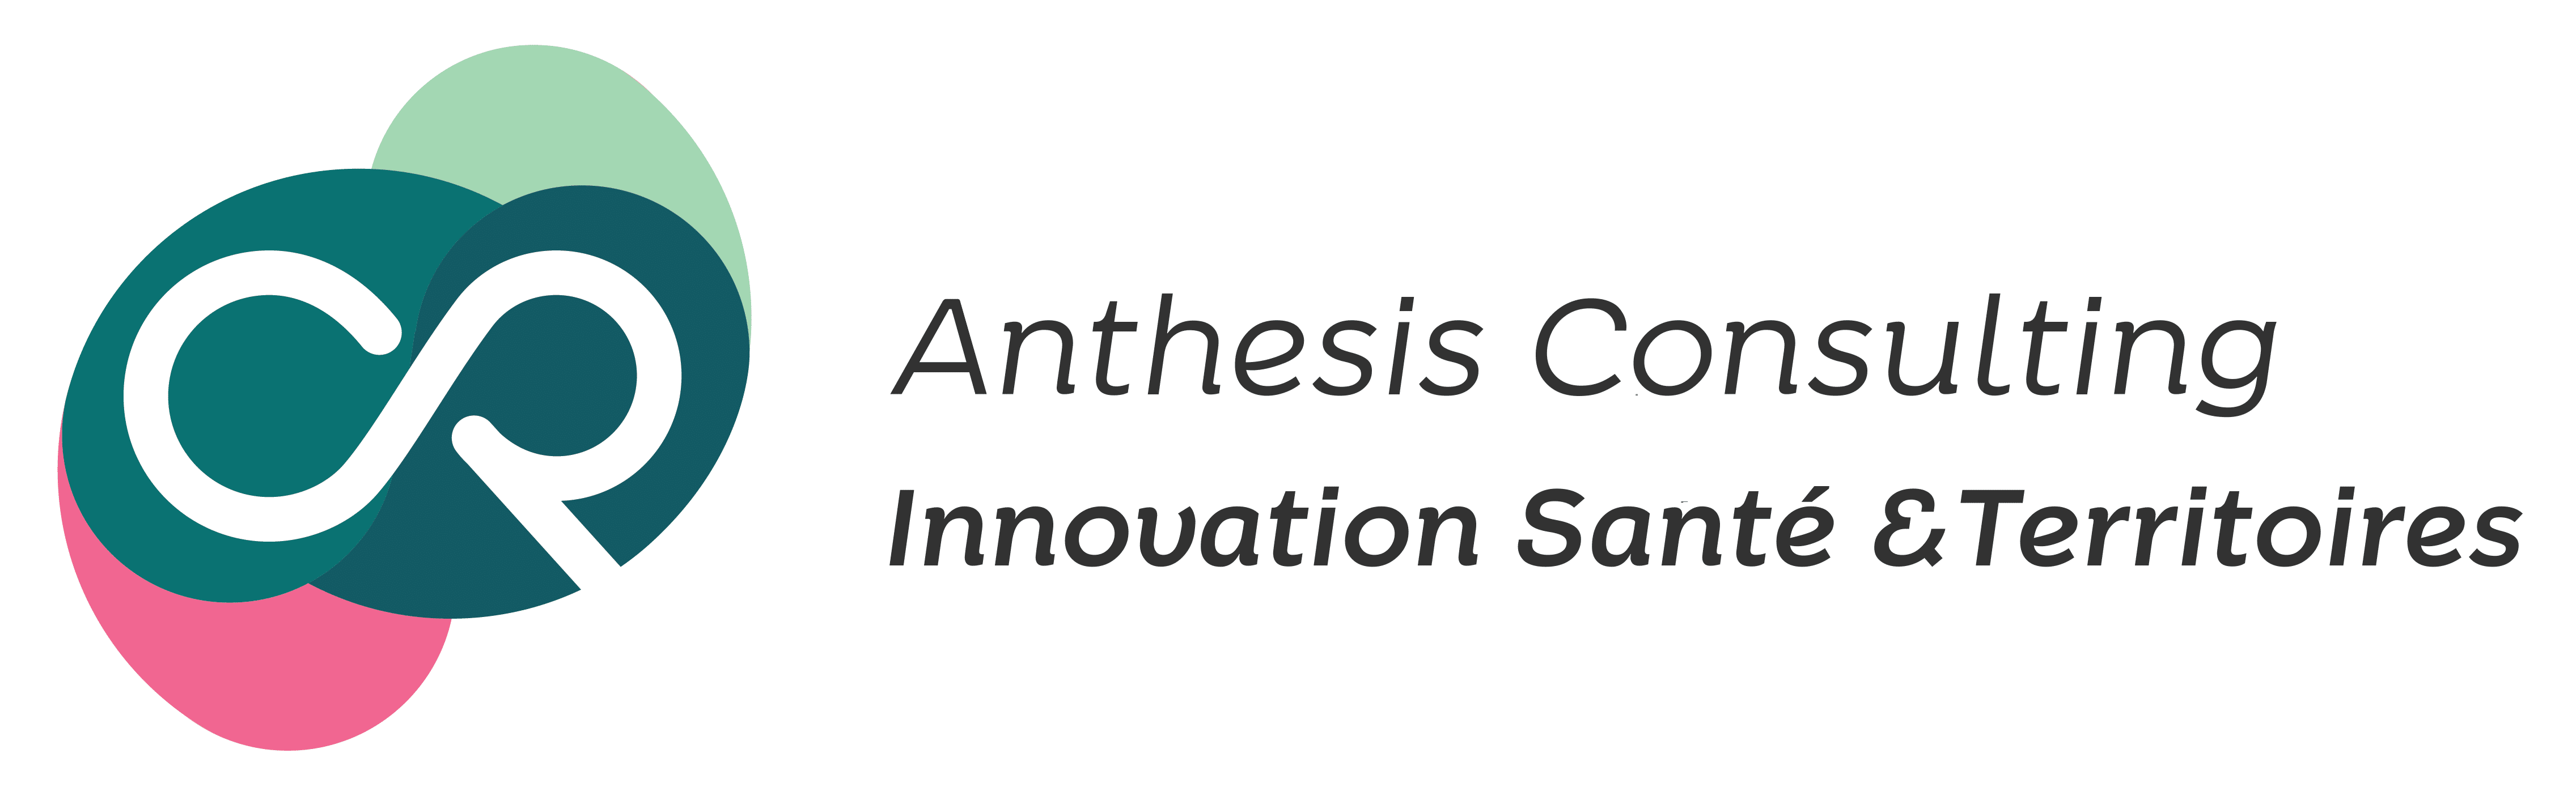 logo Anthesis Consulting